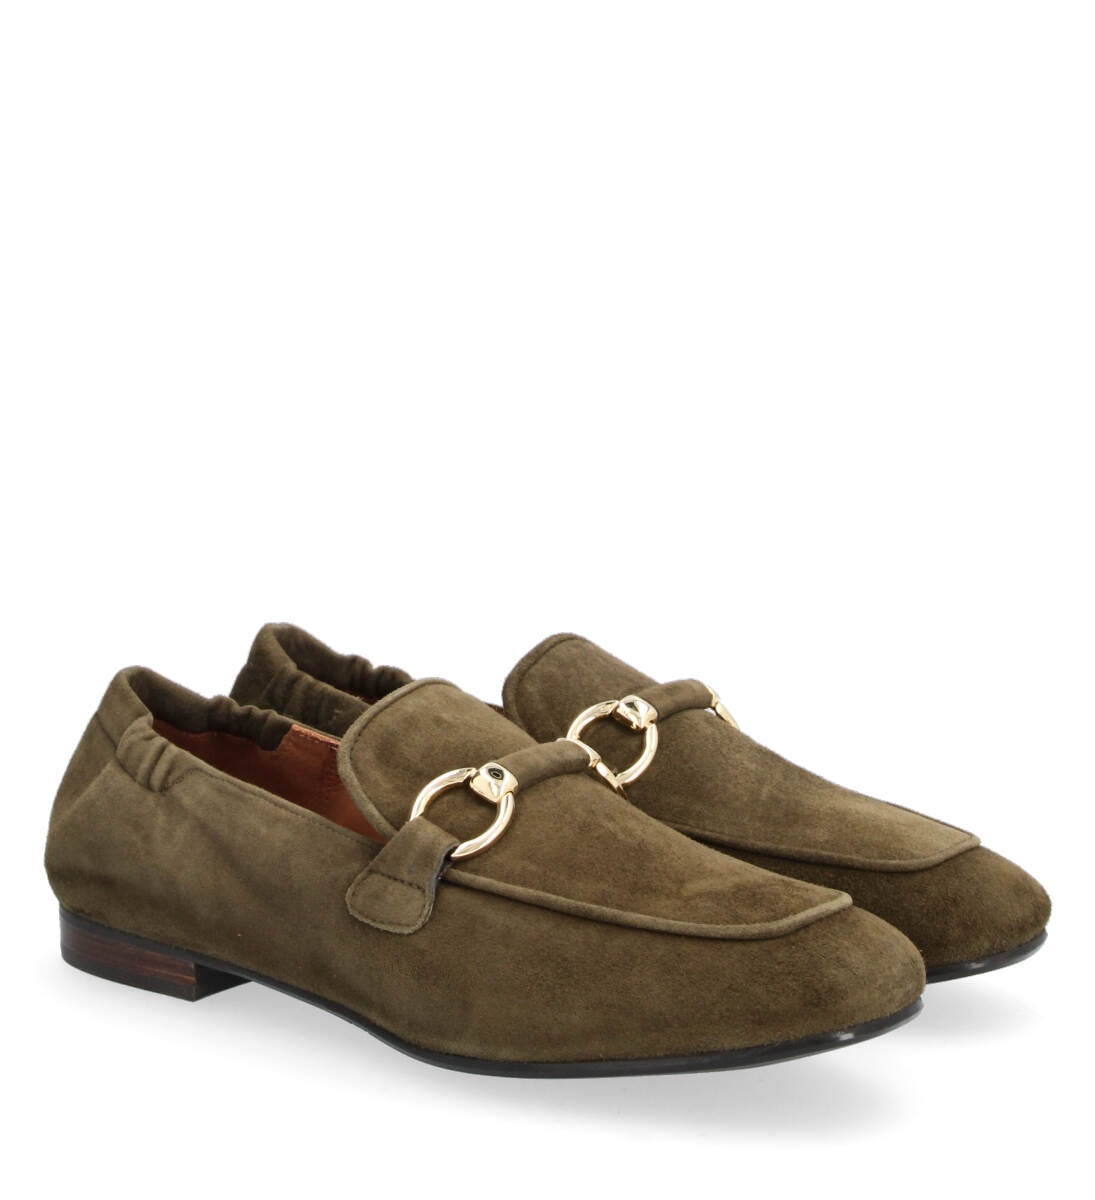 A1920 Loafers, Army Suede, 41